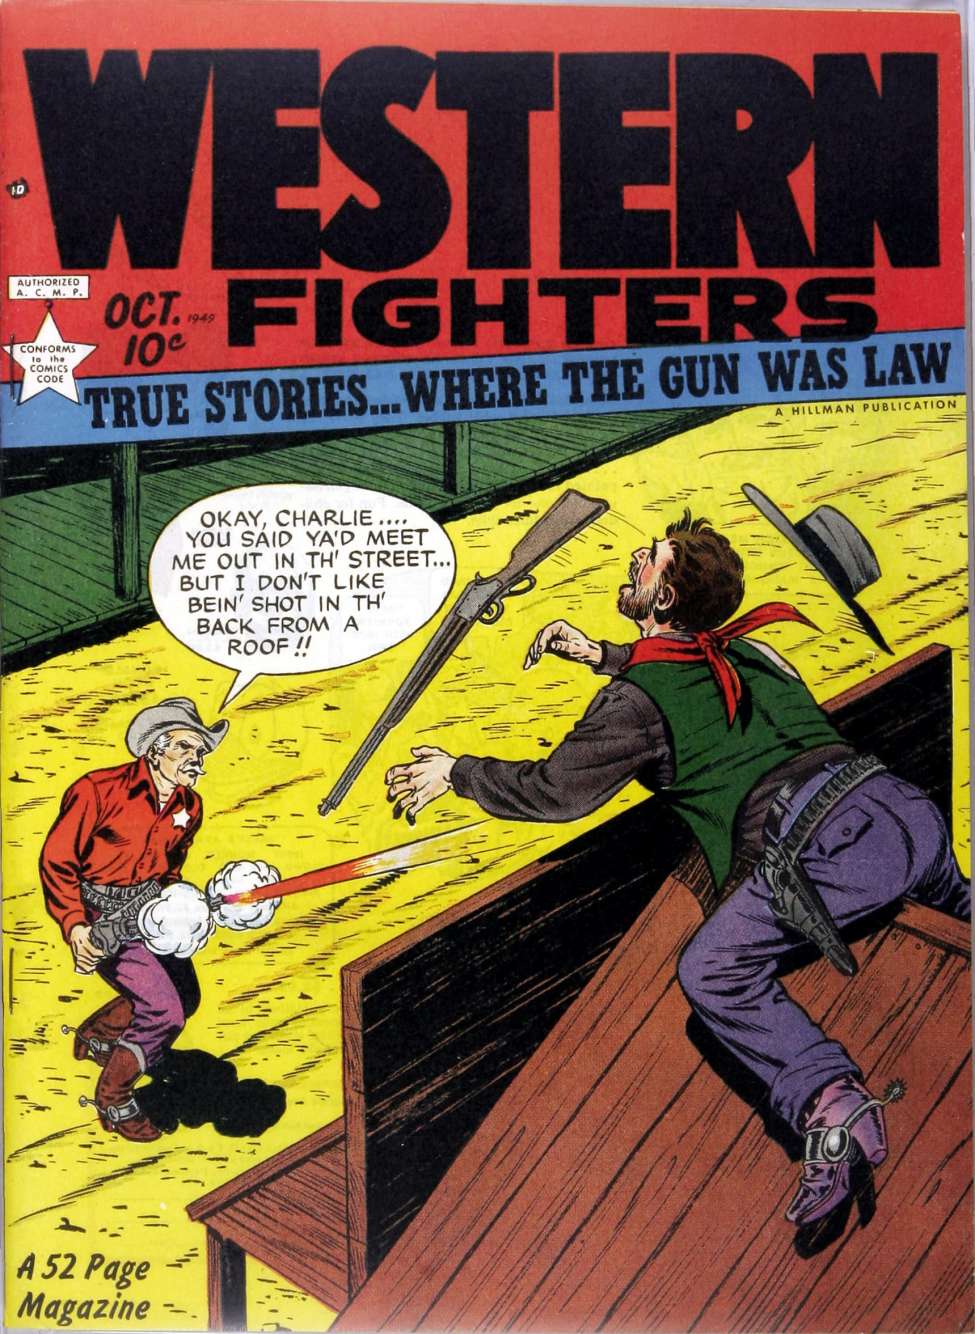 Book Cover For Western Fighters v1 11